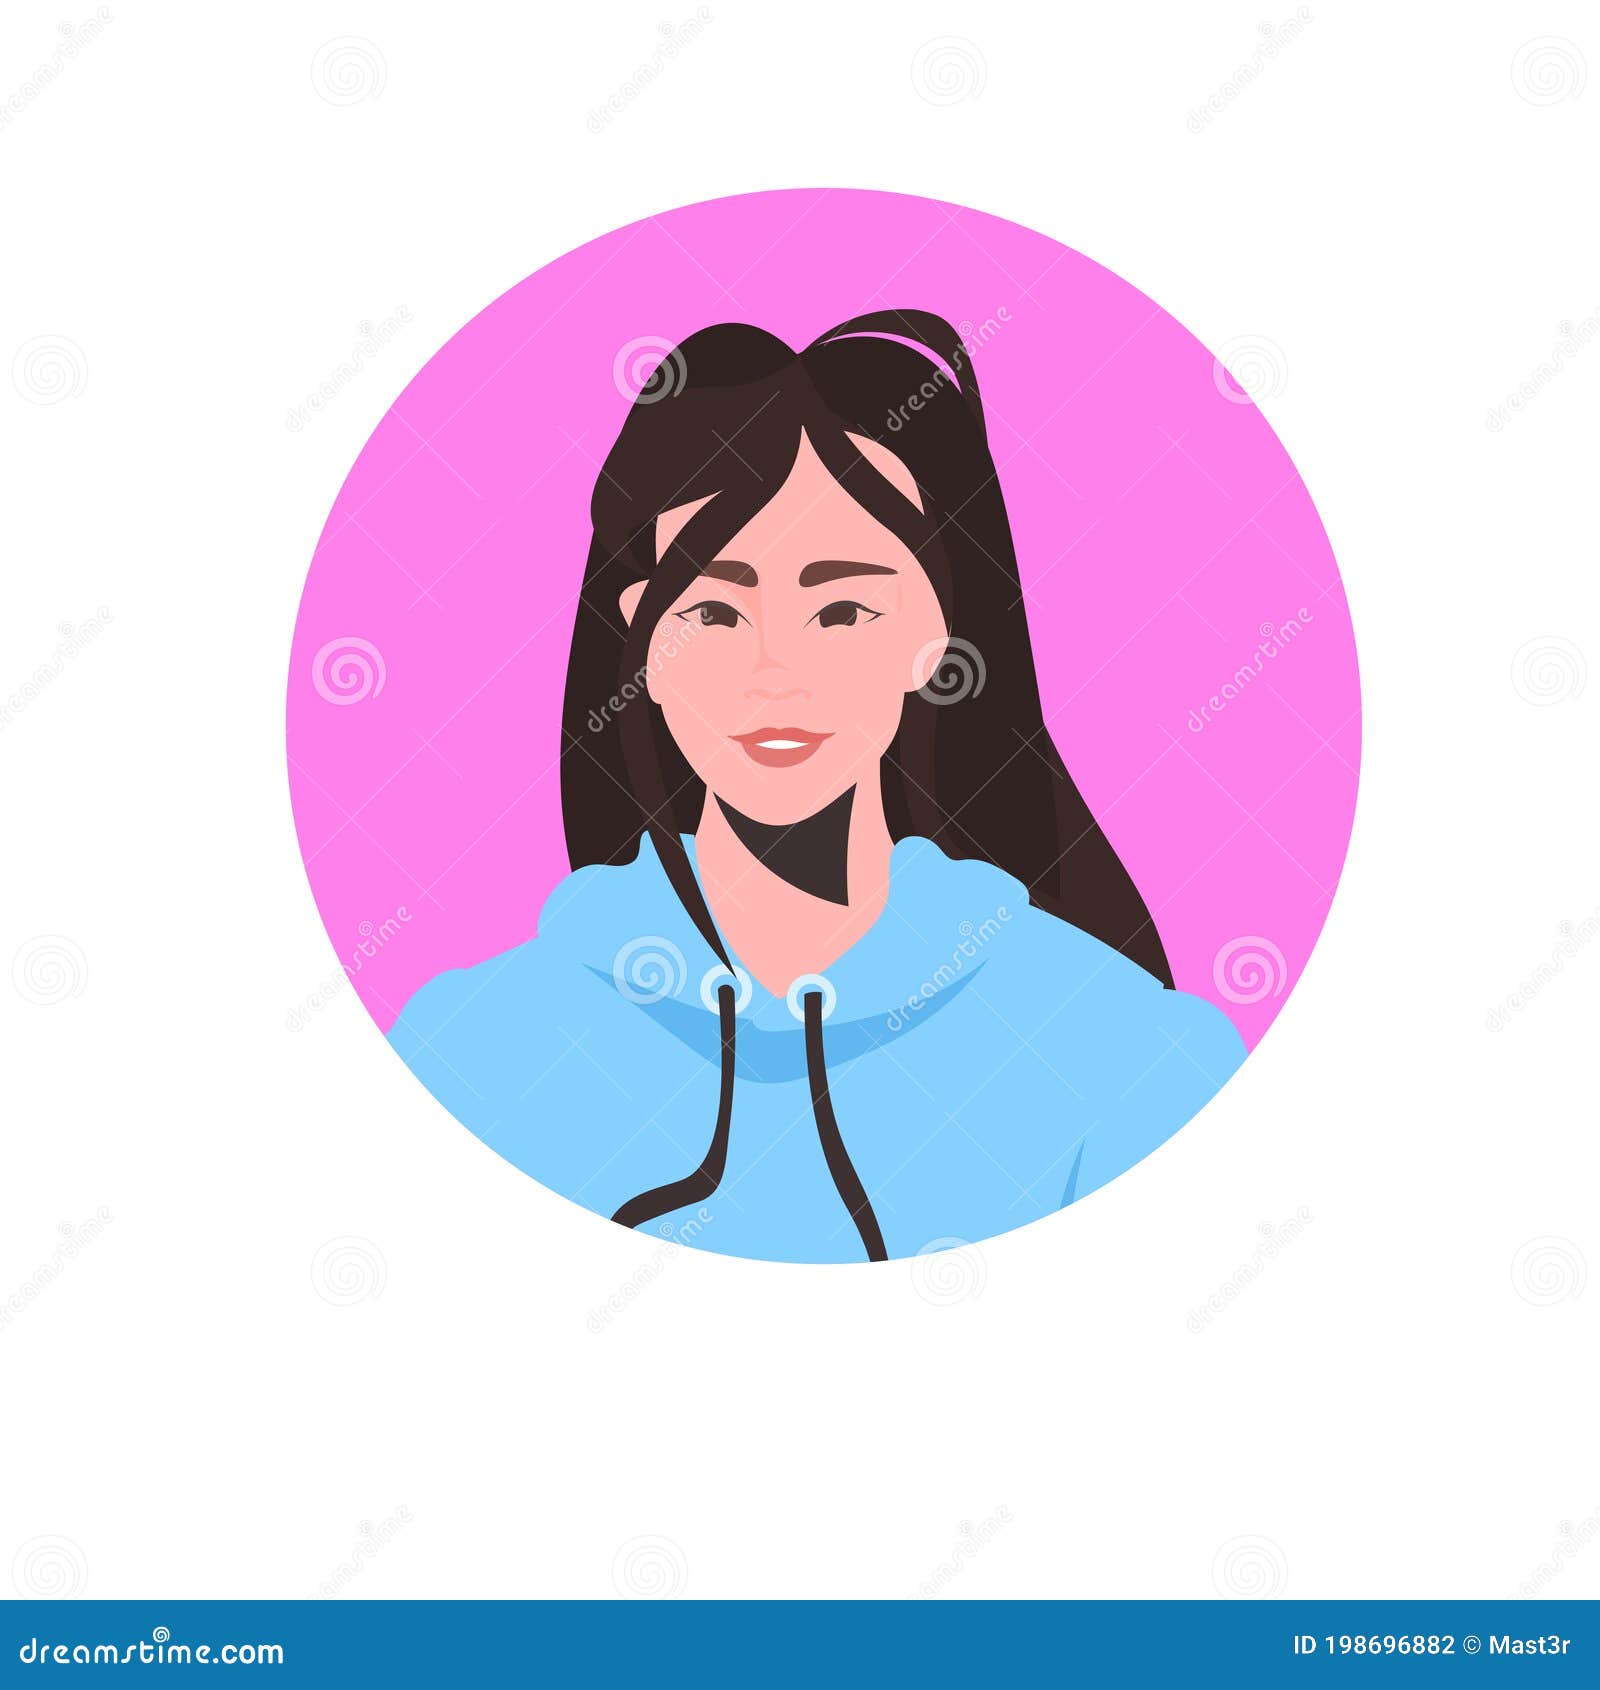 Young Woman Profile Avatar Beautiful Girl Face Female Cartoon Character  Portrait Stock Vector - Illustration of graphic, cheerful: 198696882